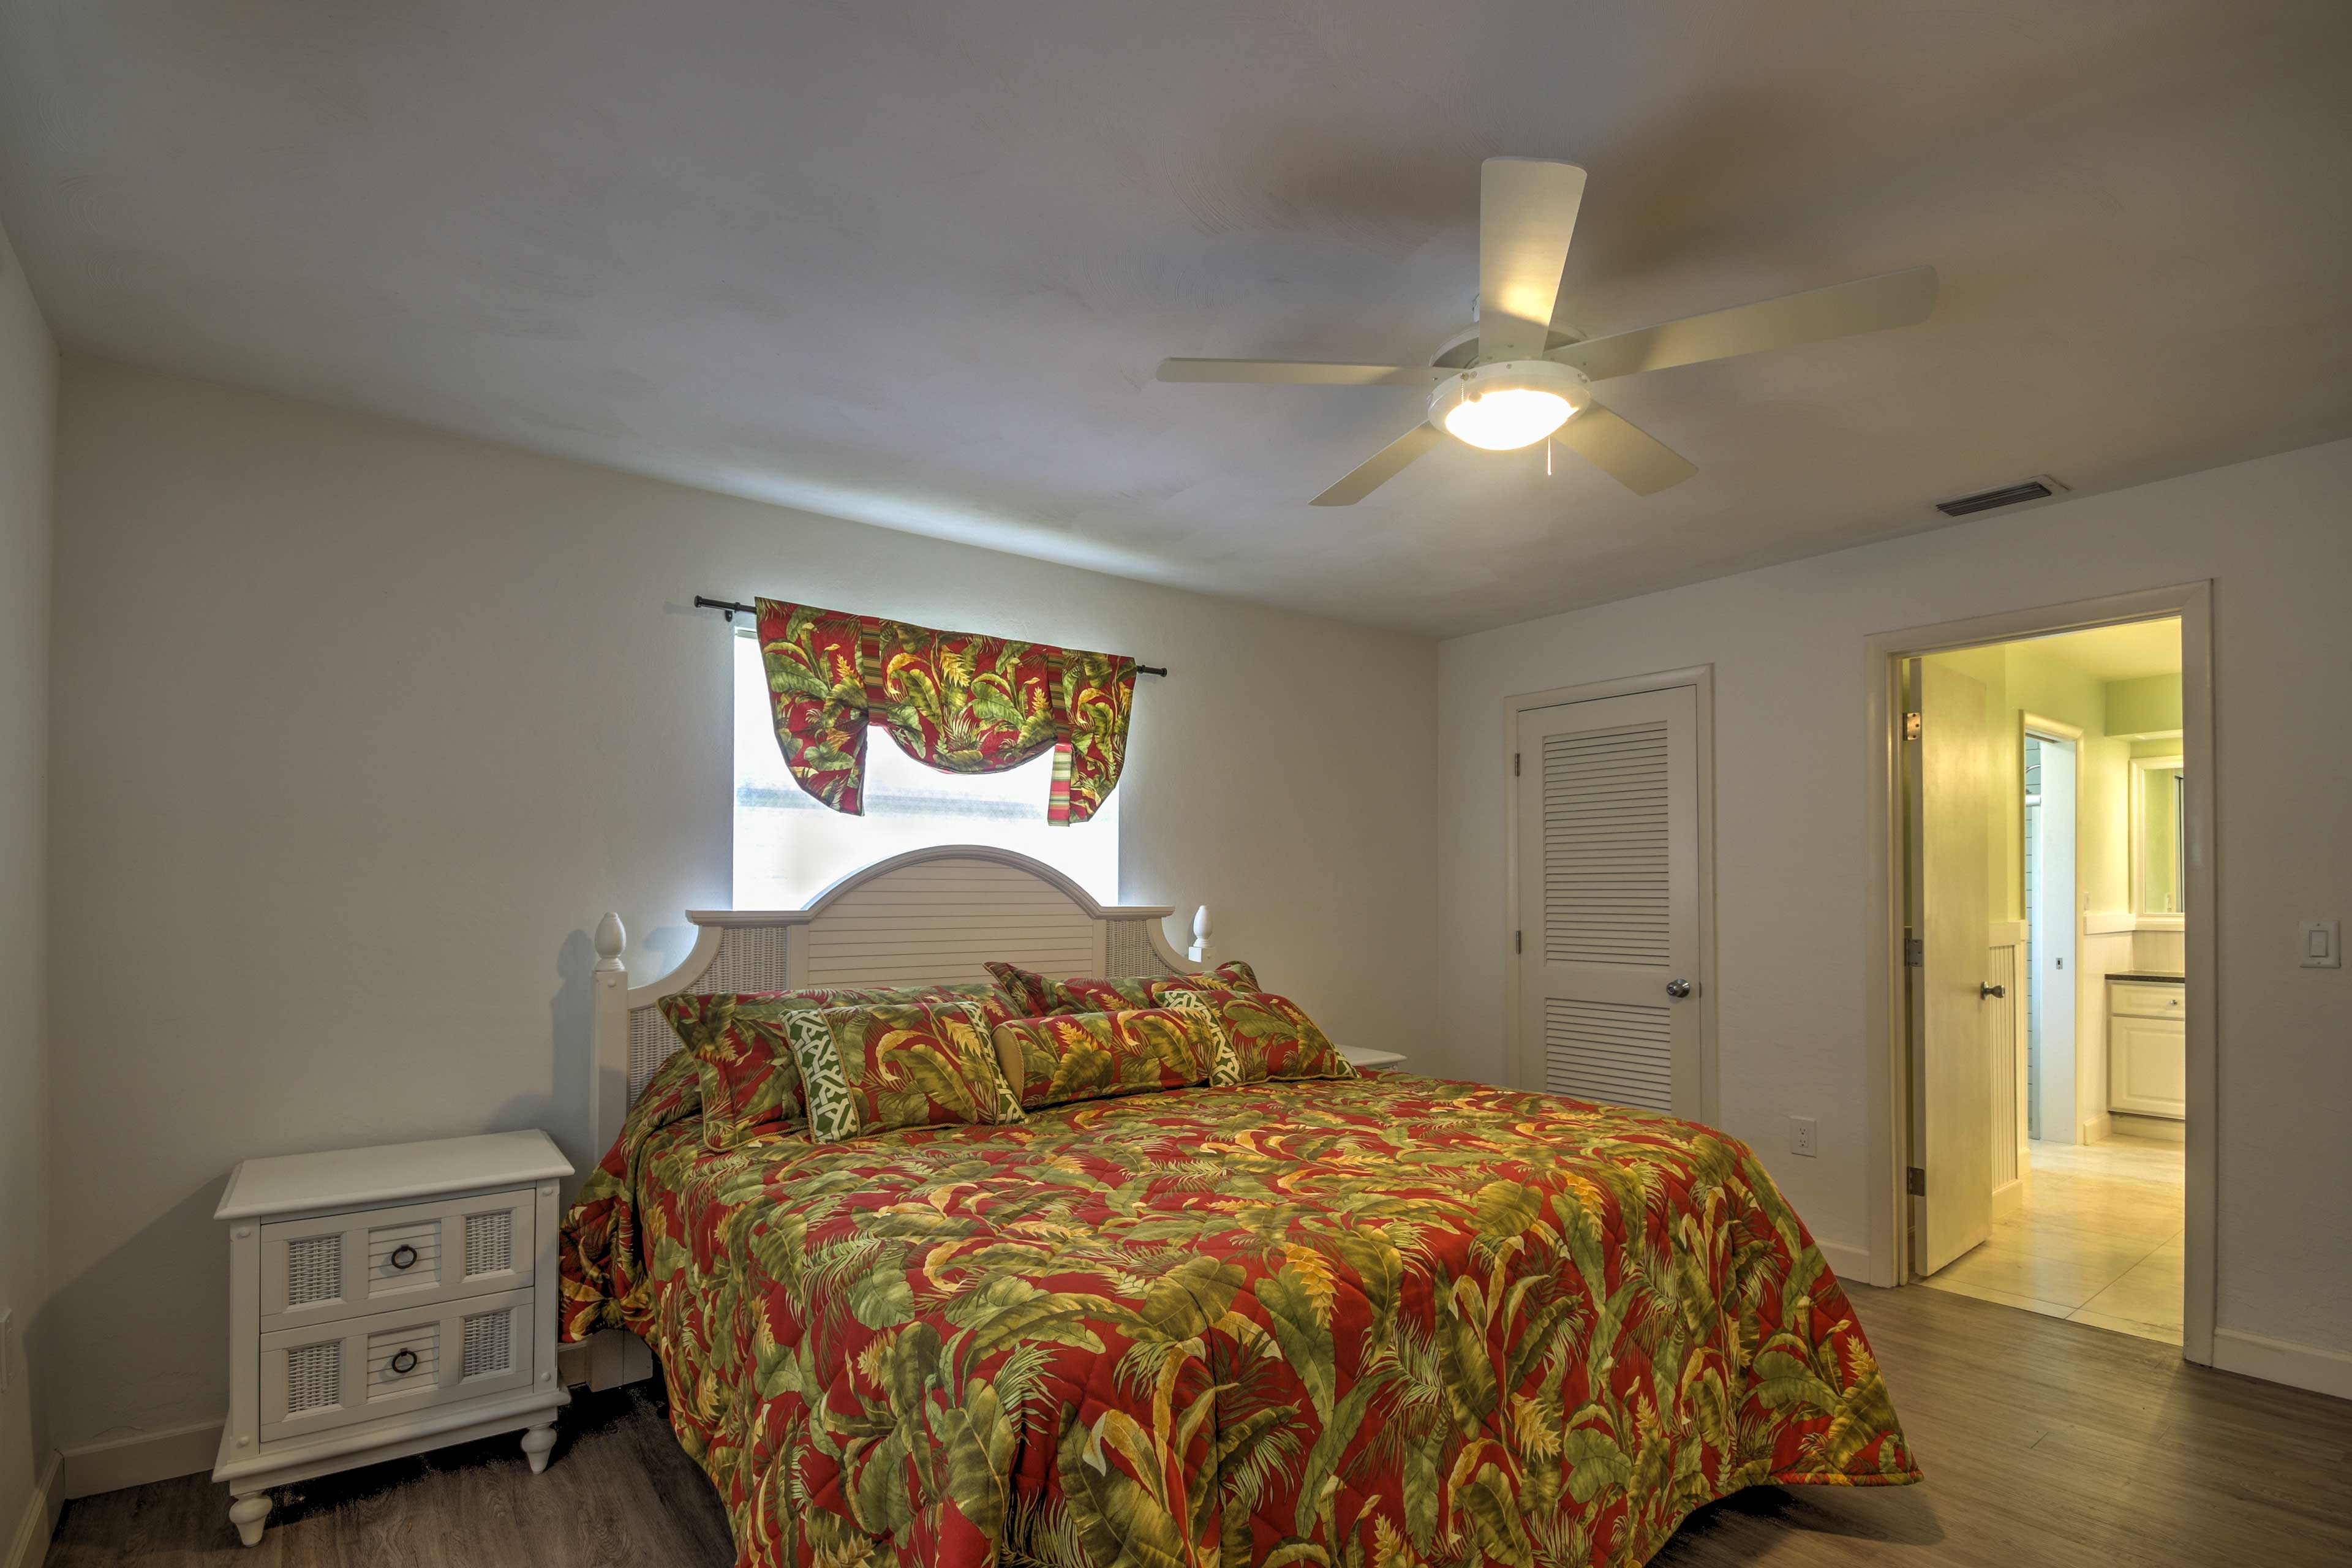 Make your way to the first master bedroom, which has a king bed.